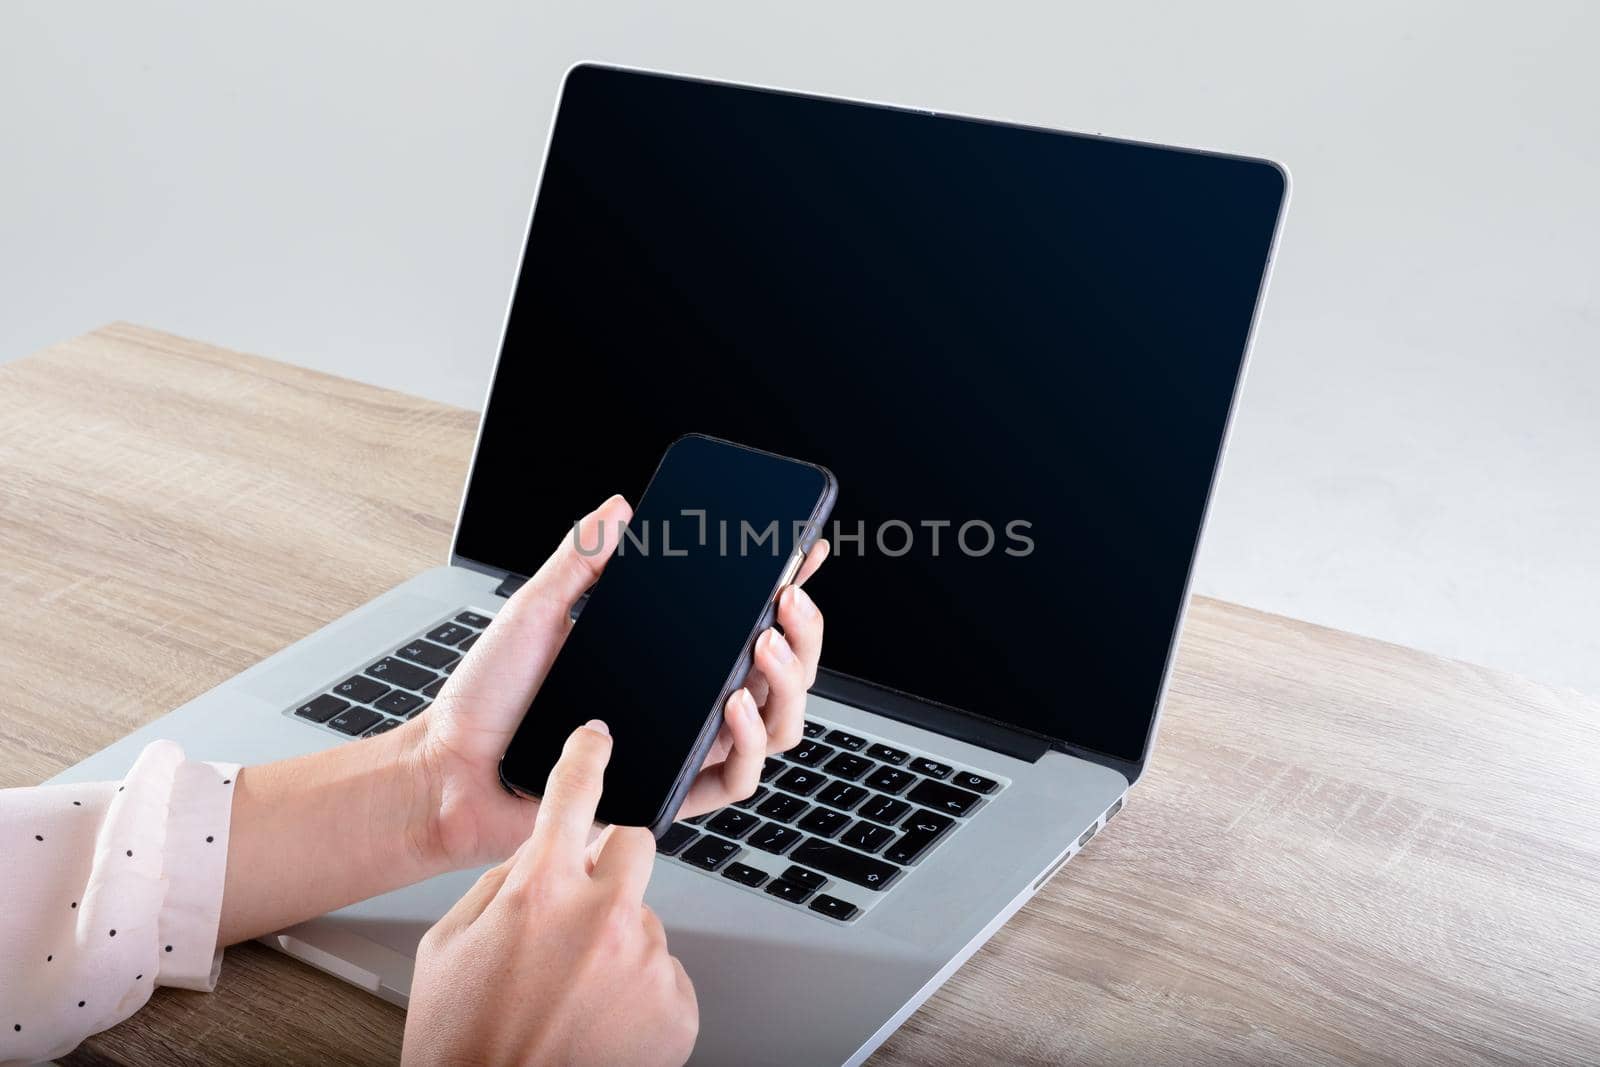 Midsection of caucasian businesswoman using laptop and smartphone, isolated on grey background. business, technology, communication and growth concept.